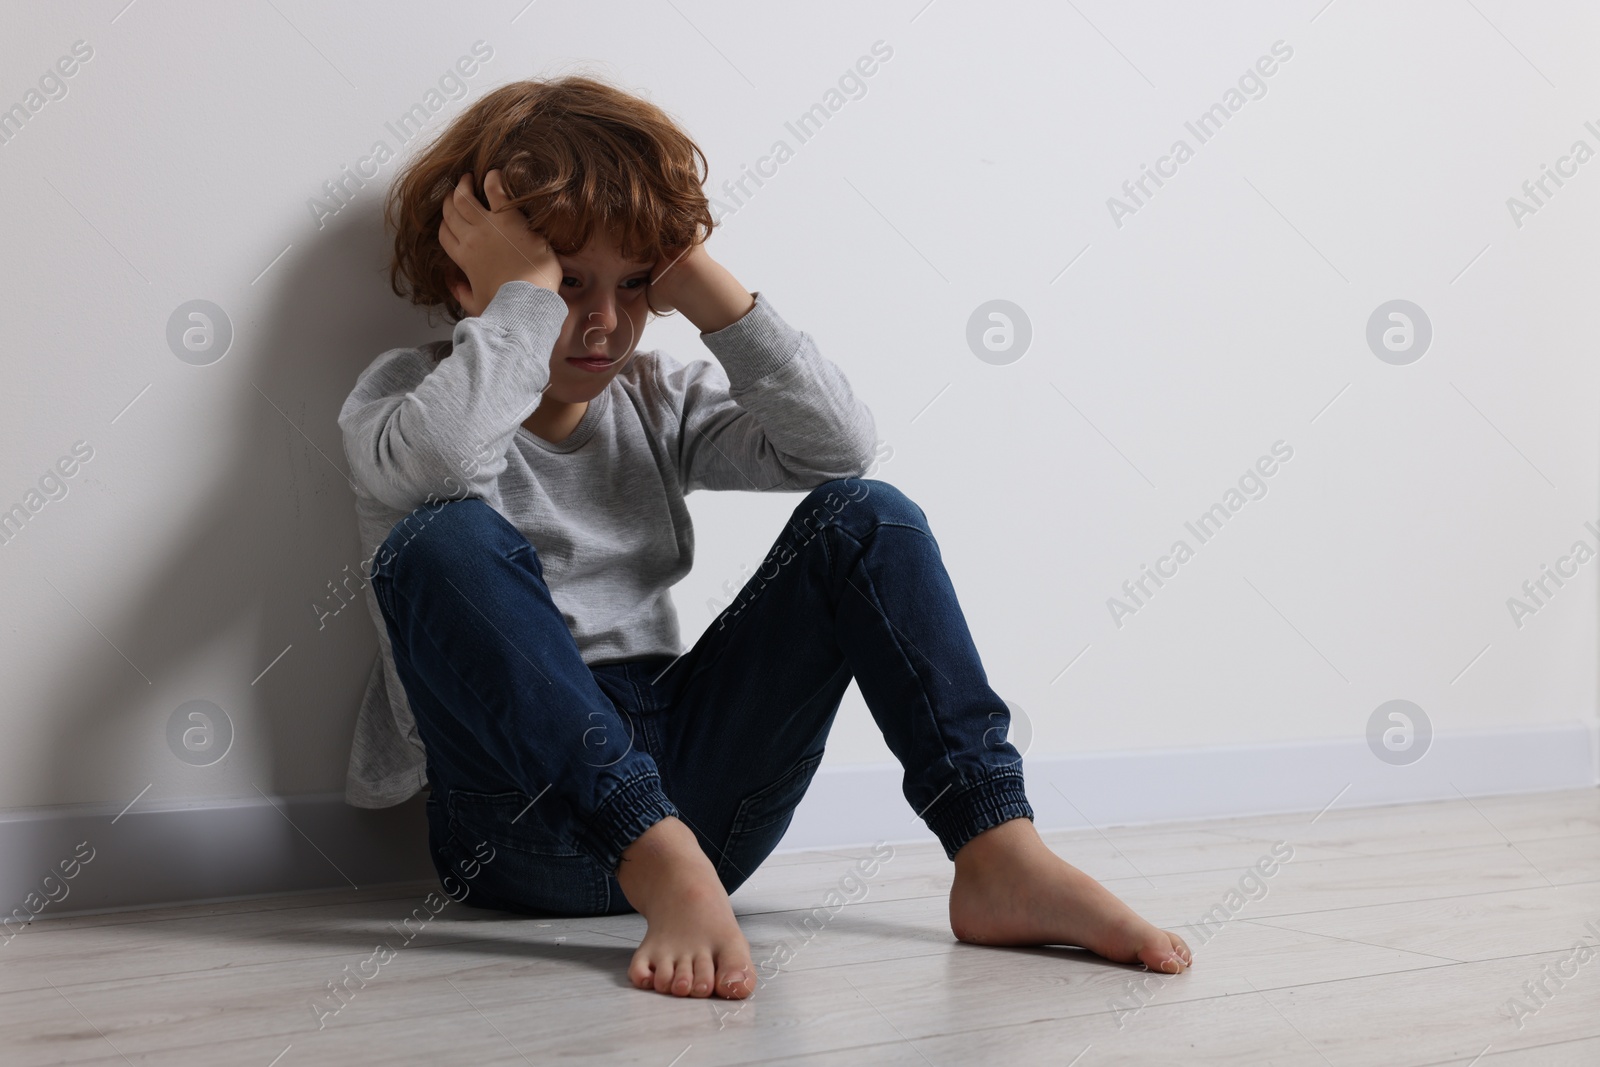 Photo of Child abuse. Upset boy sitting on floor near white wall, space for text